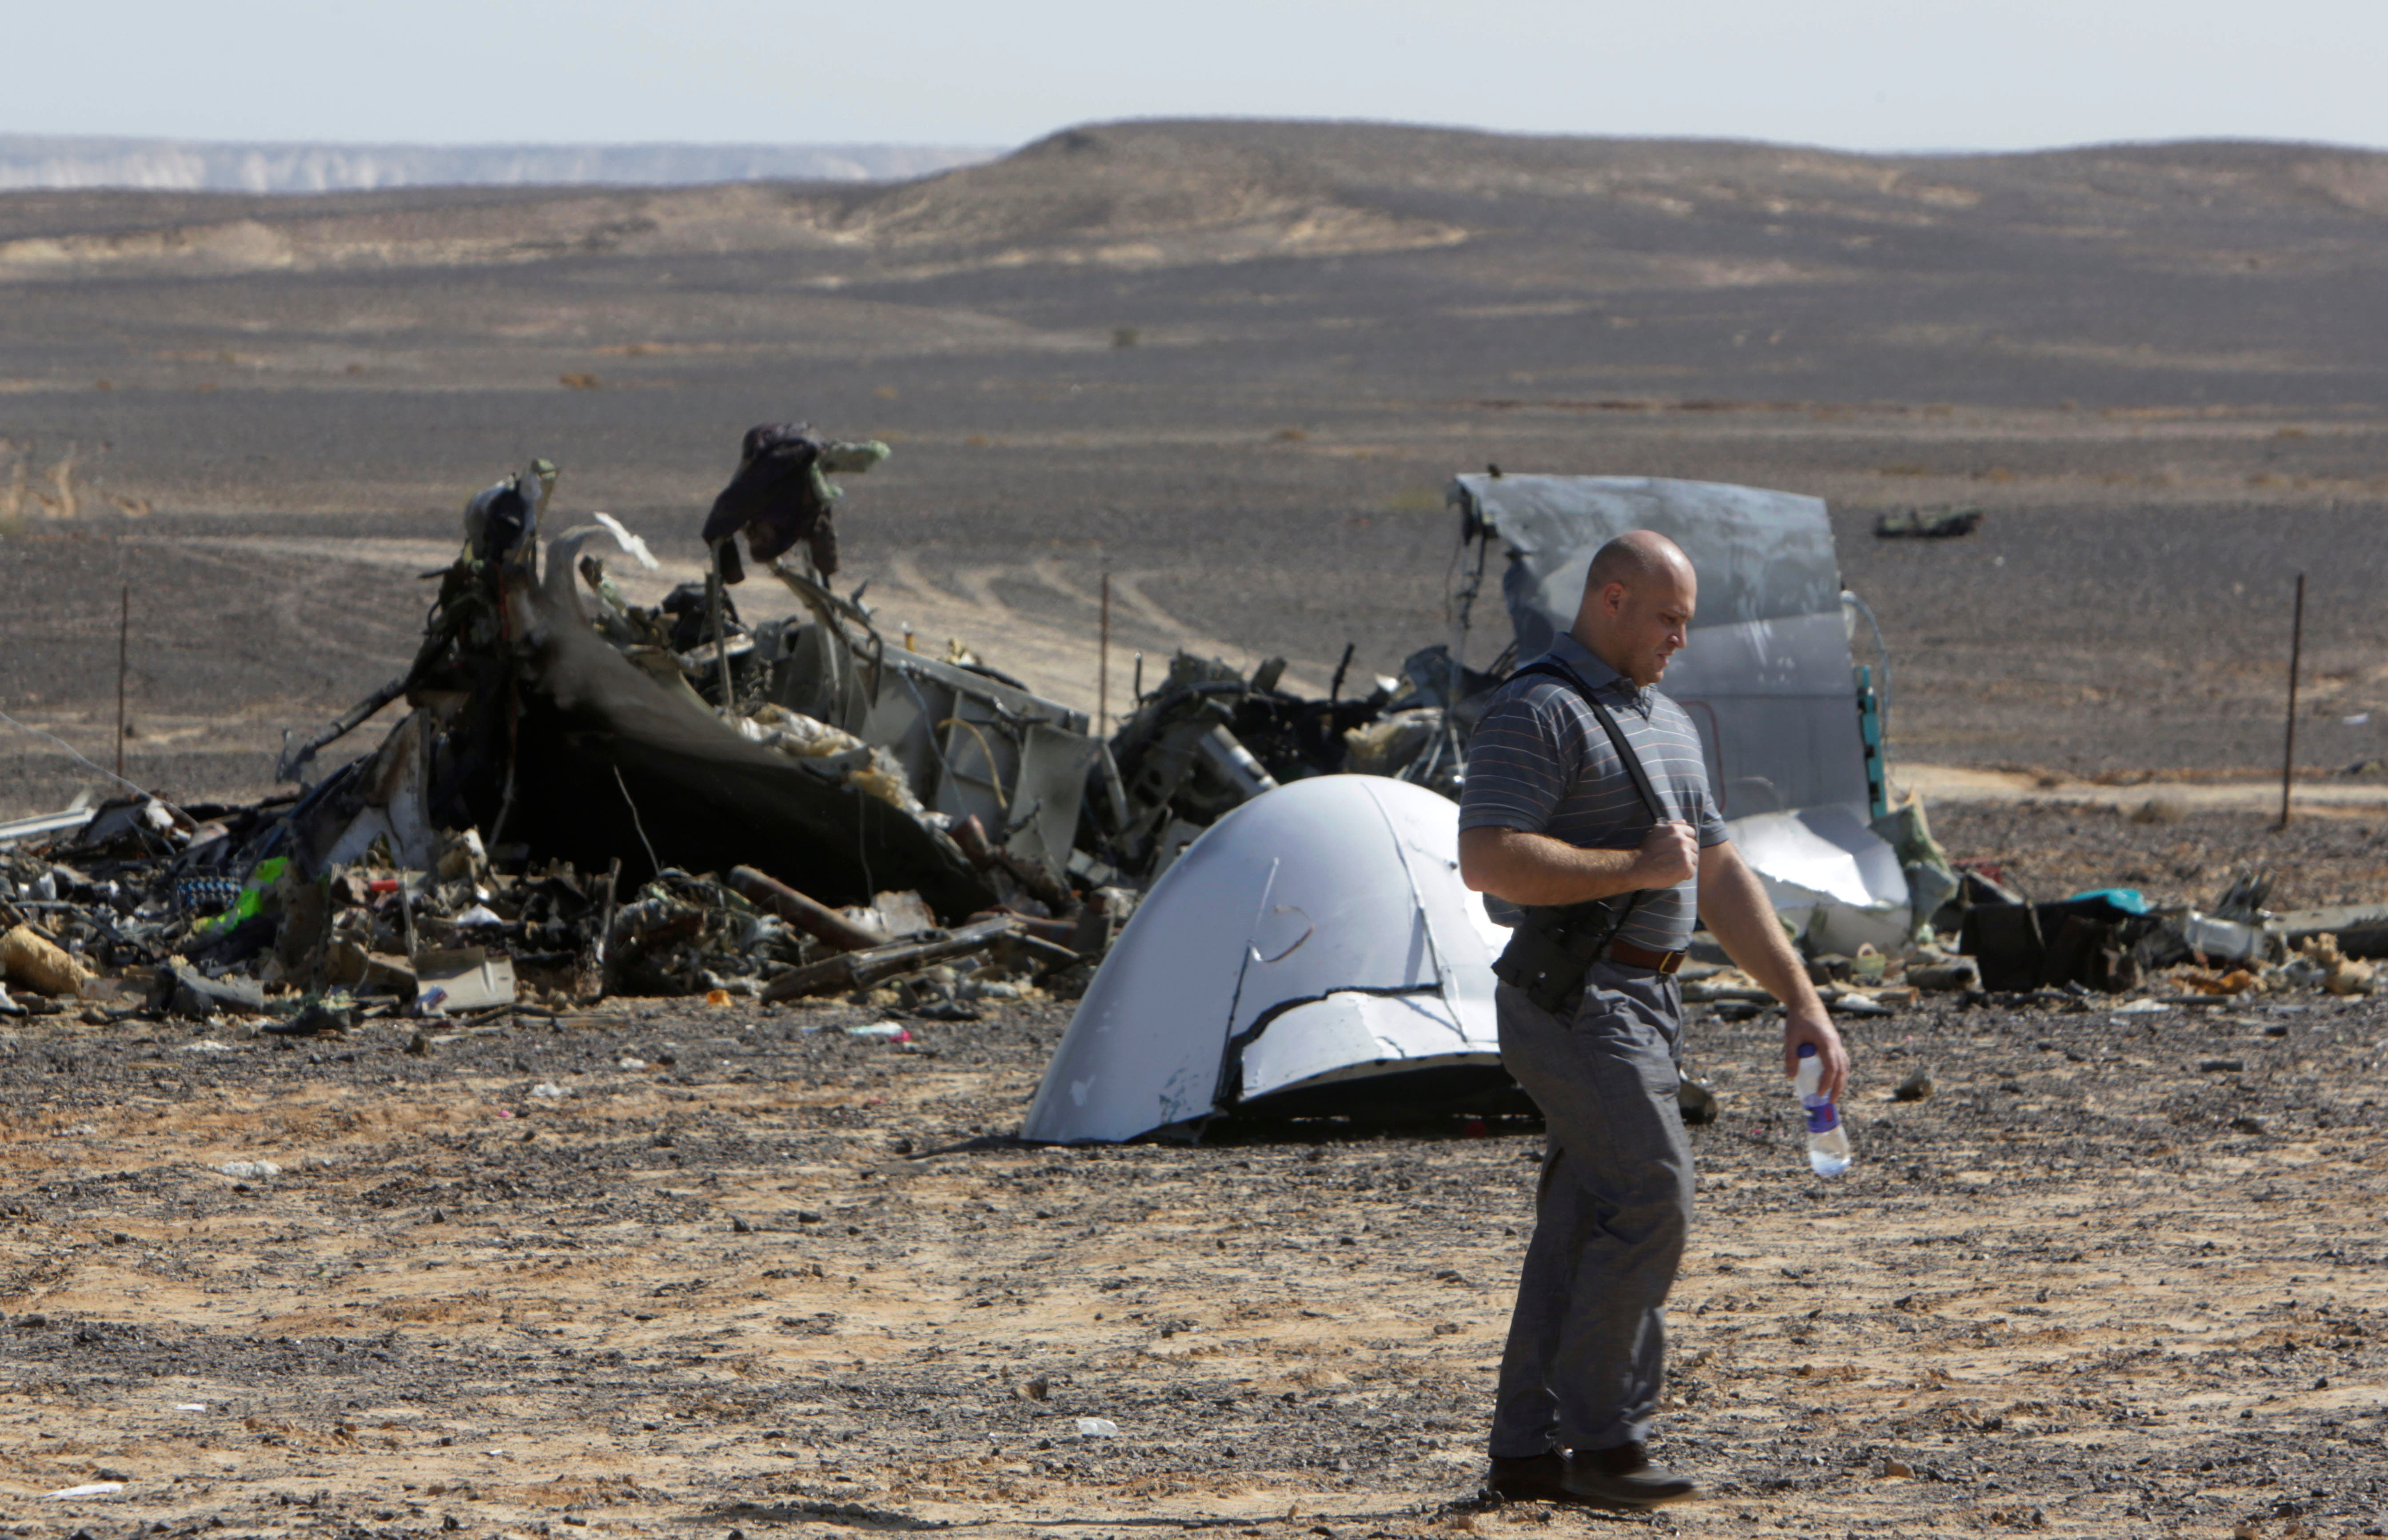 A Russian investigator walks near wreckage a day after a passenger jet bound for St. Petersburg, Russia, crashed in Hassana, Egypt, on Sunday, Nov. 1, 2015.  (AP)